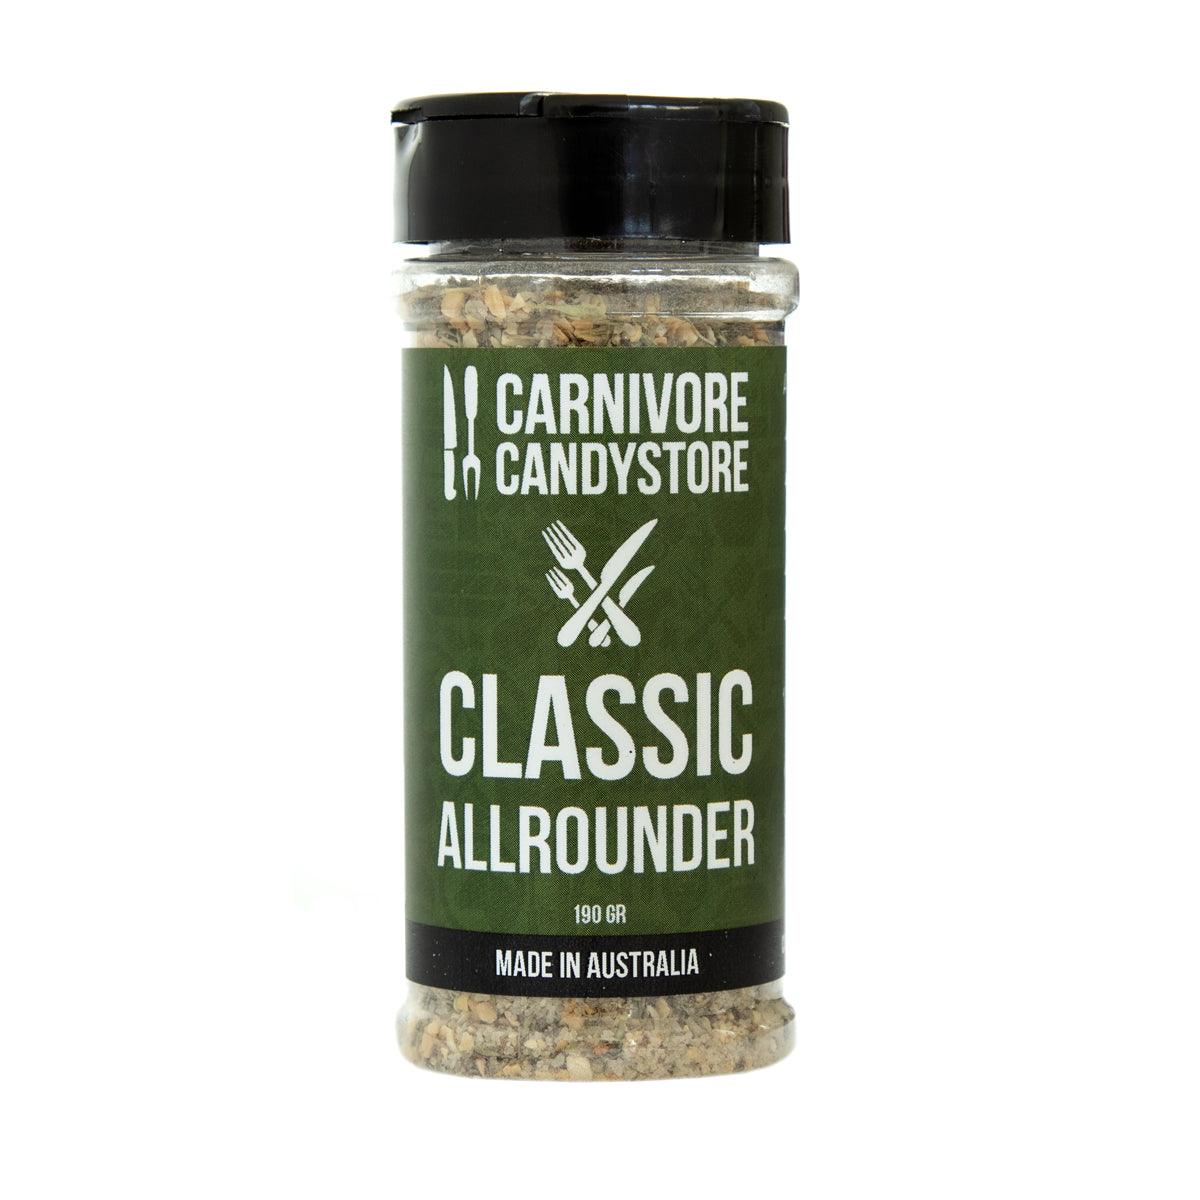 CARNIVORE CANDYSTORE CLASSIC ALLROUNDER 190G - Horizon Leisure